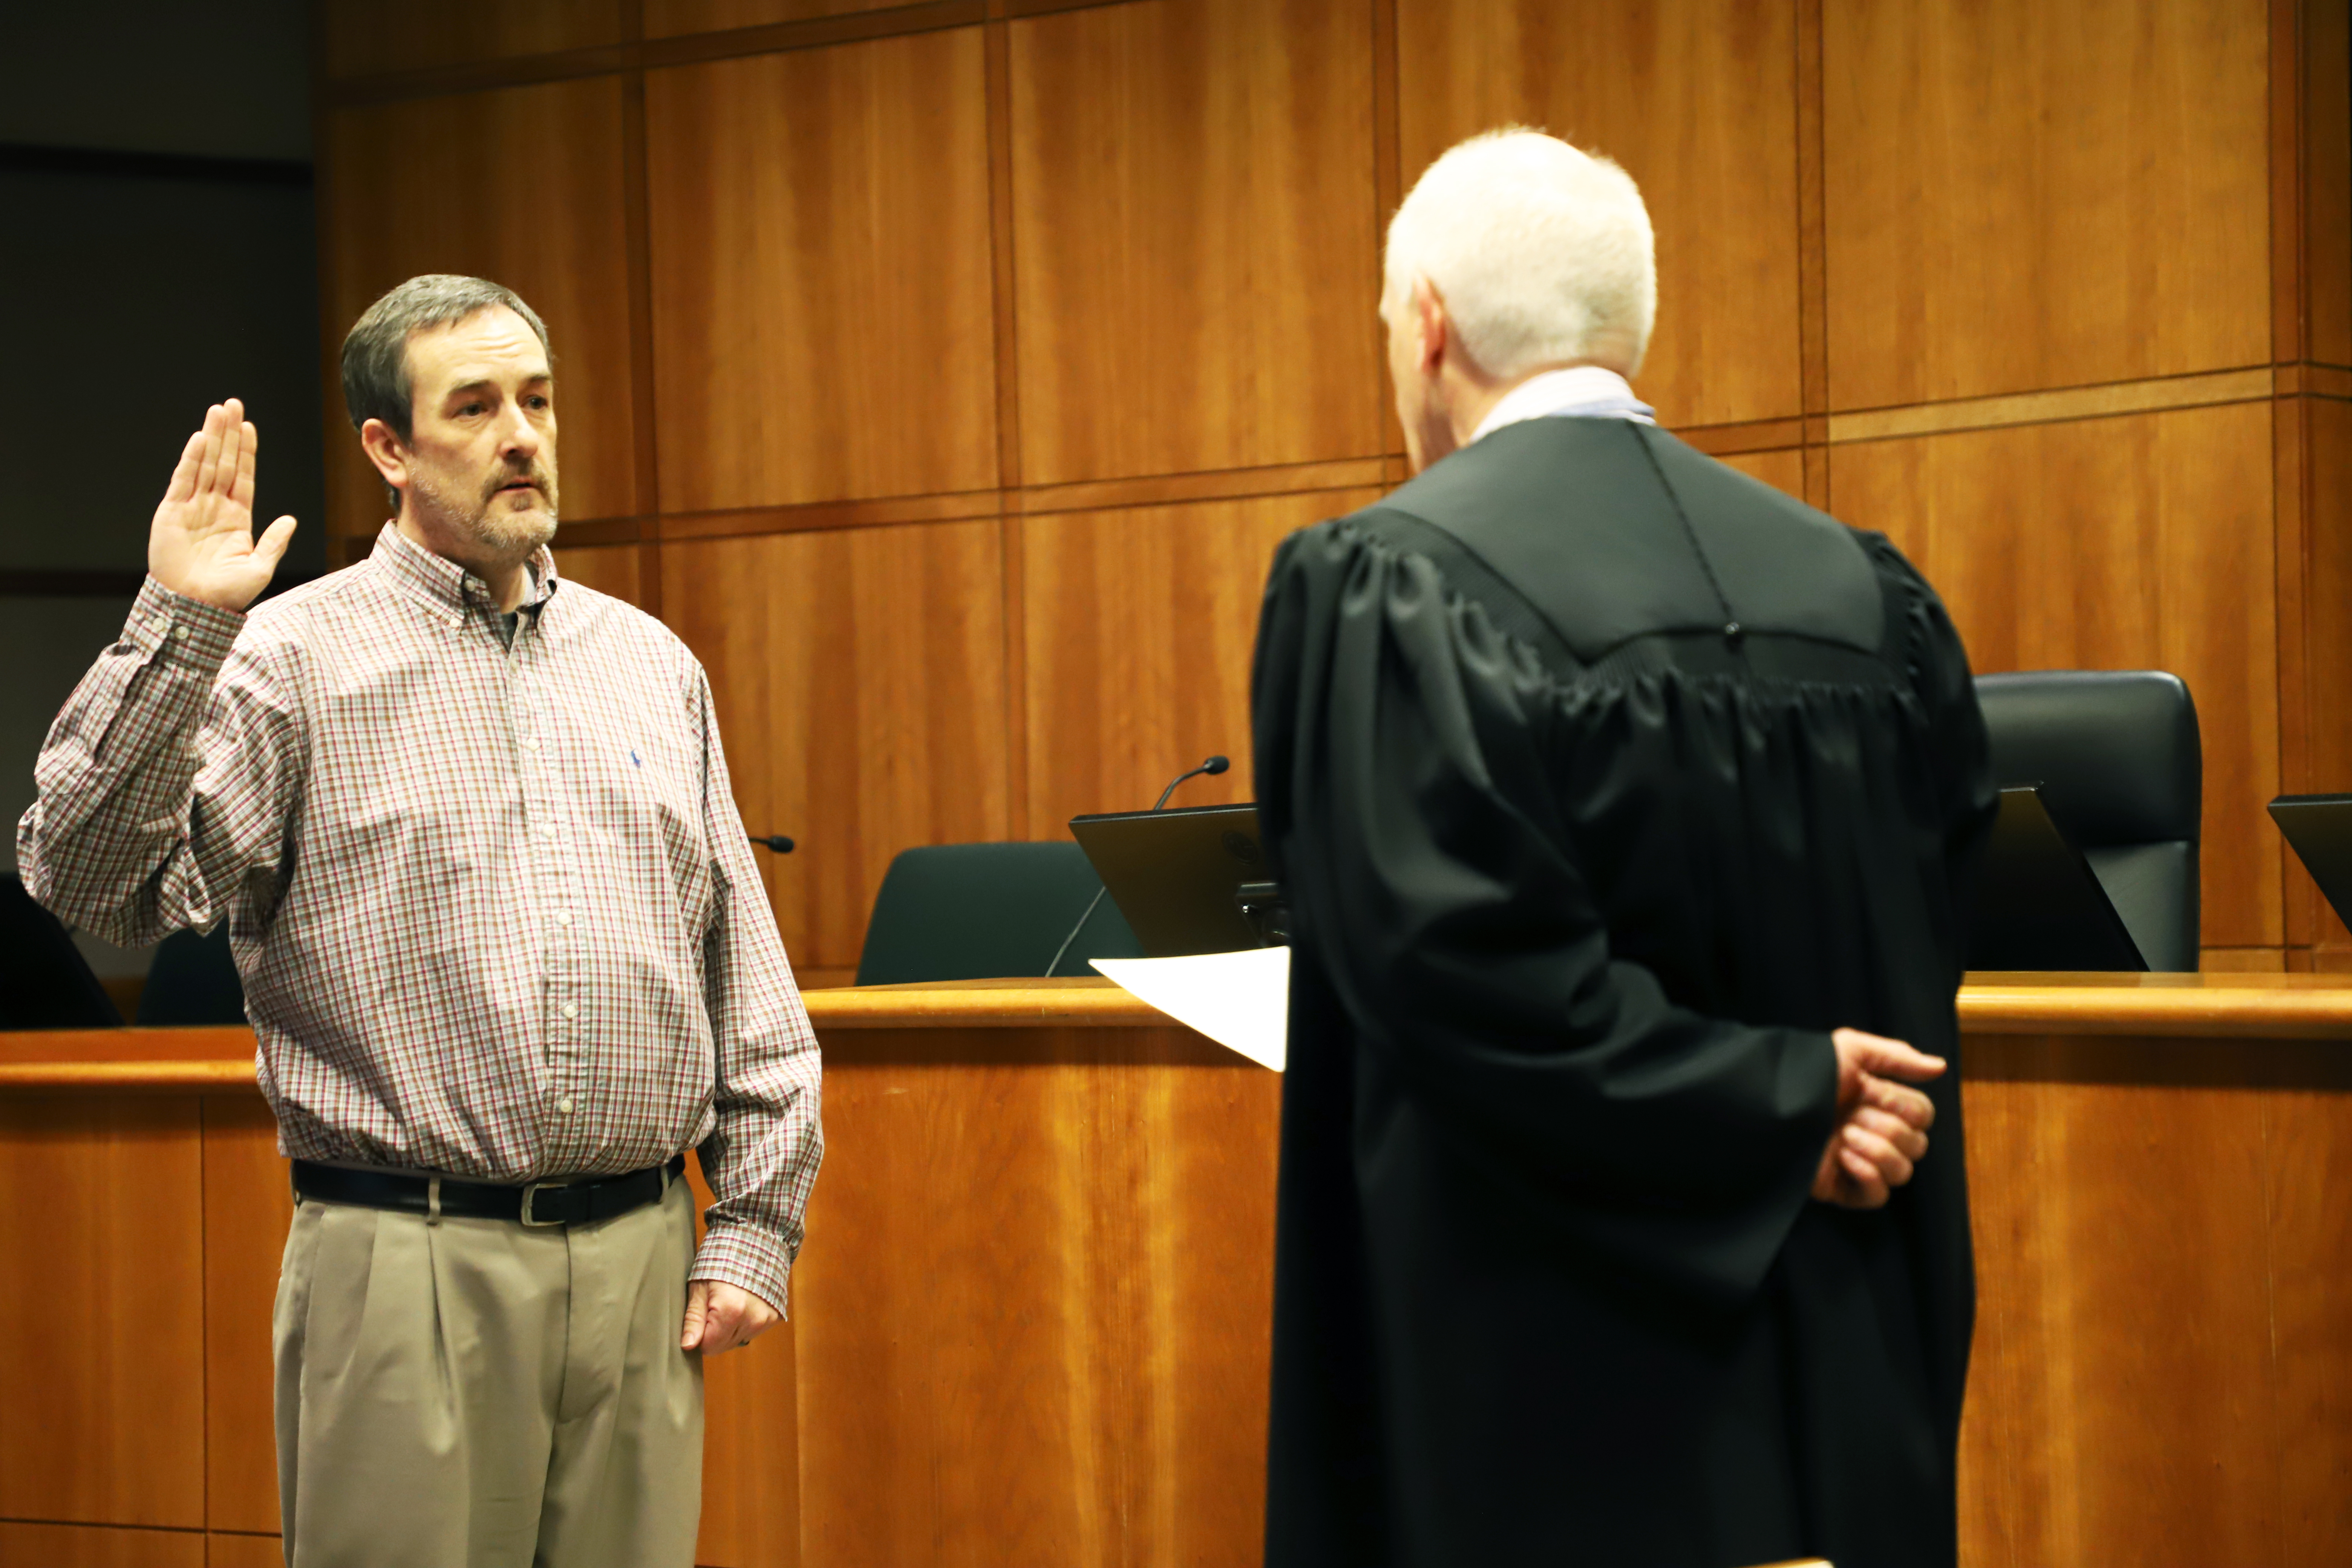 Bryan Douglass stands with a judge, right hand raised, as he takes the oath of office.